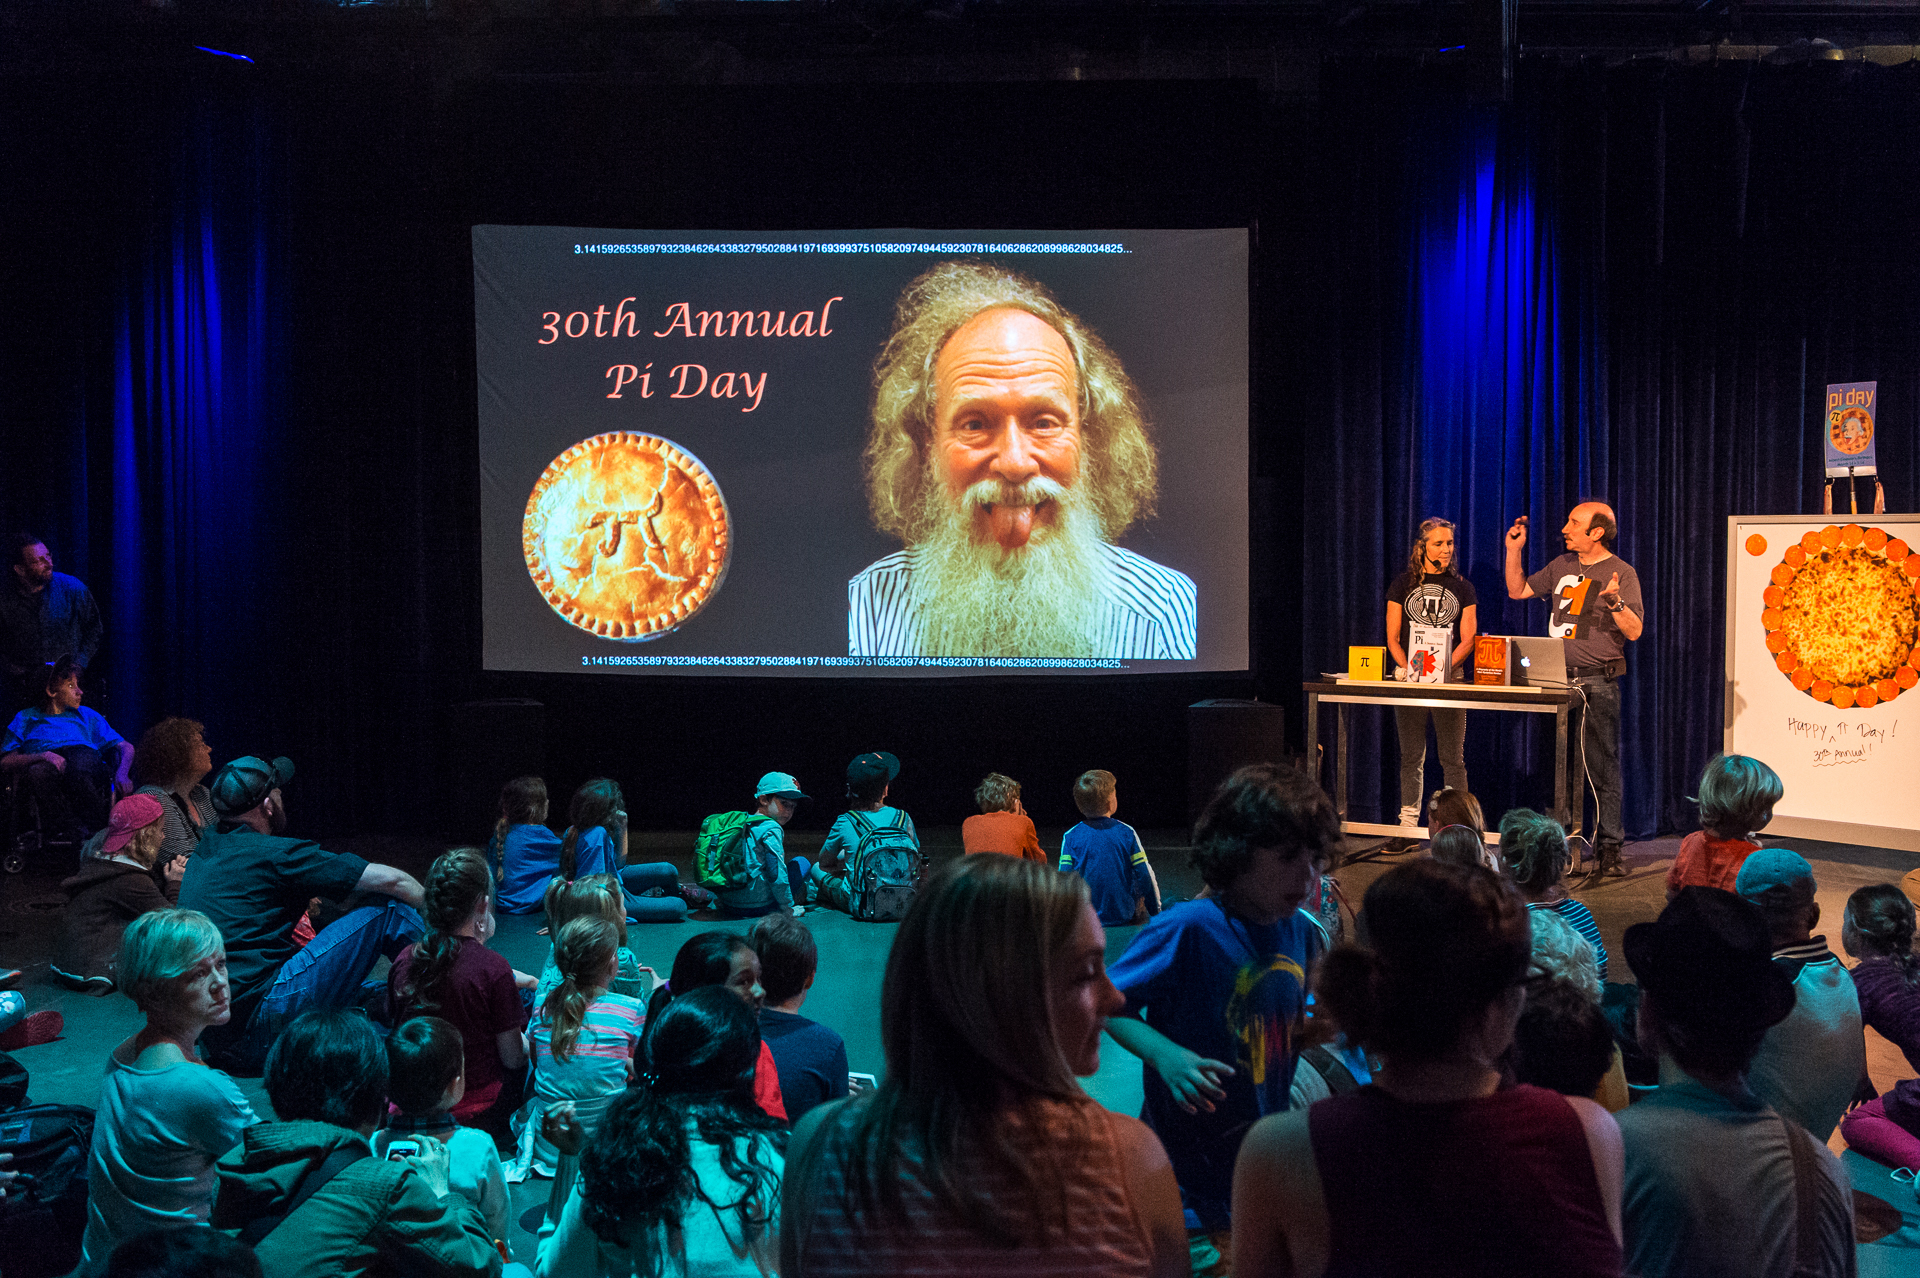 PHOTO: Scientists at the Exploratorium give a presentation about Pi Day during the 30th annual celebration in San Francisco, Tuesday, March 14, 2017.